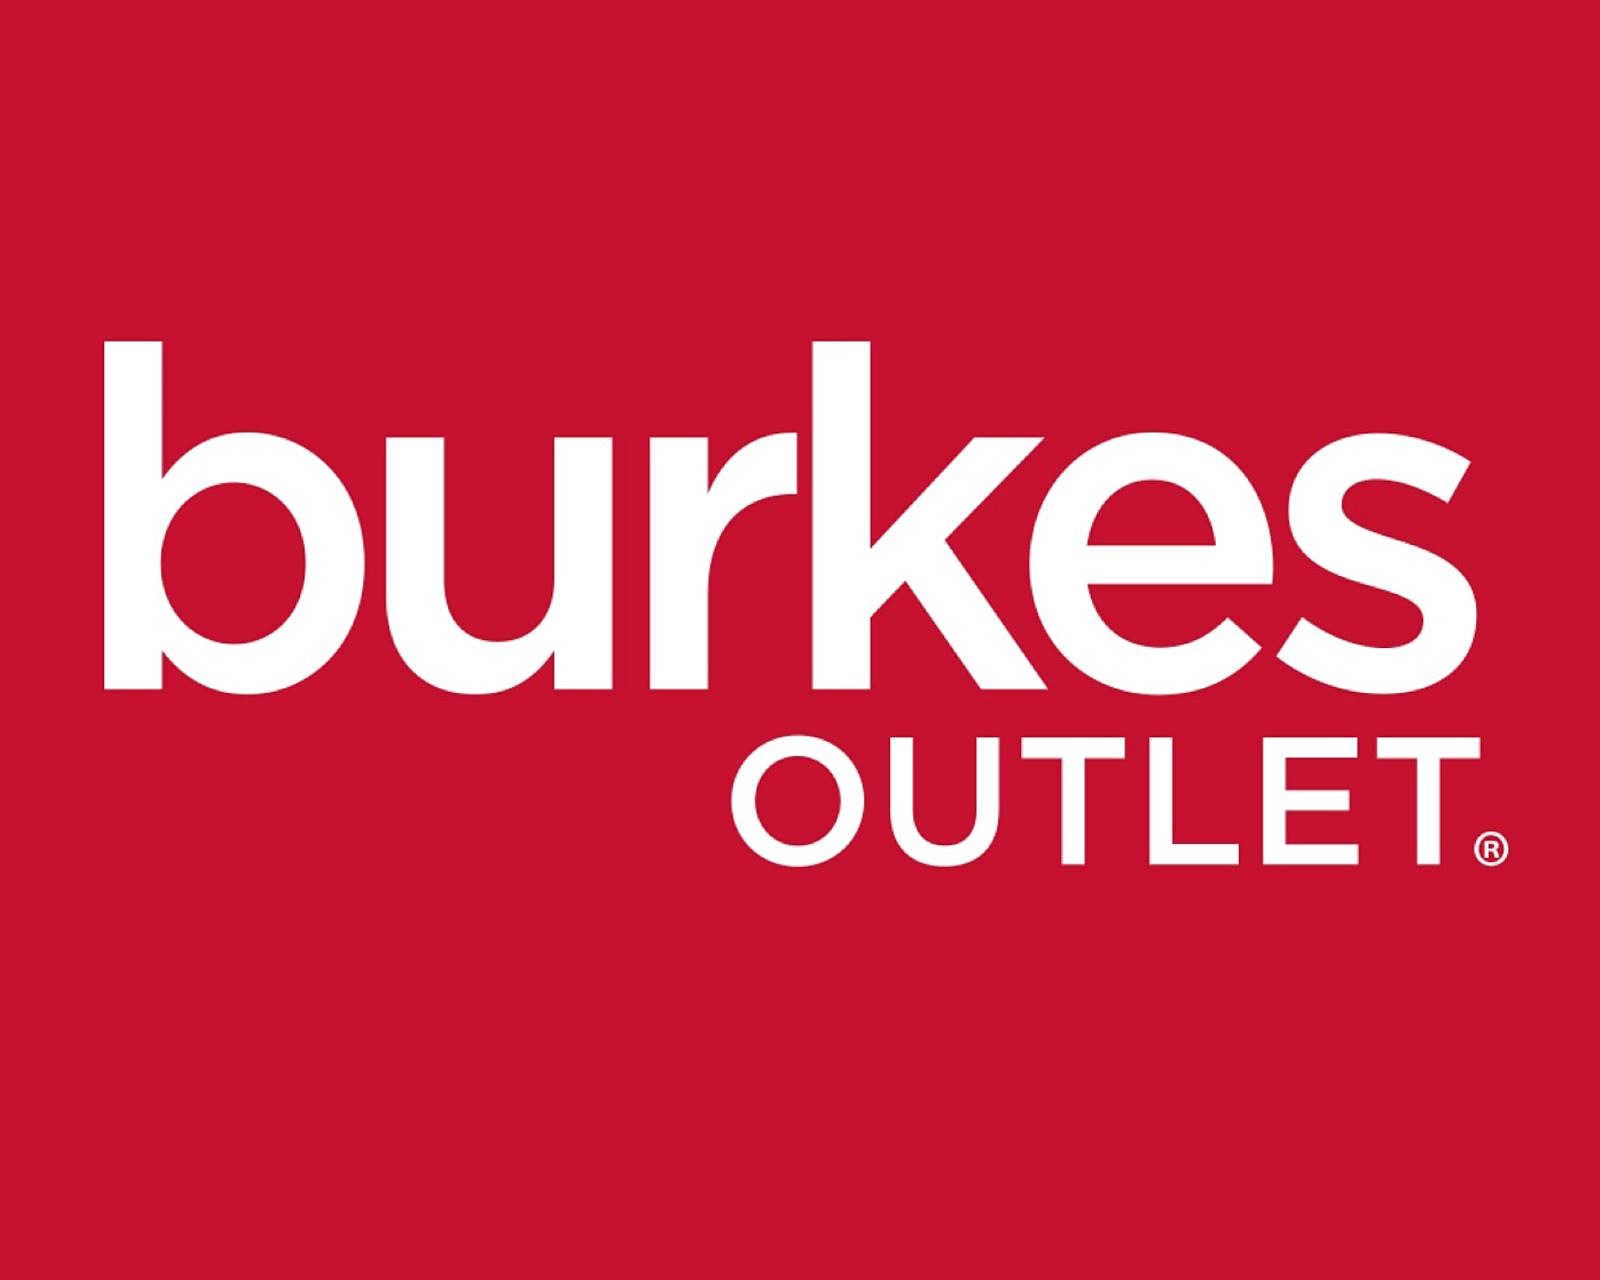 Texas Burkes Outlet stores to be renamed 'Bealls' after acquisition